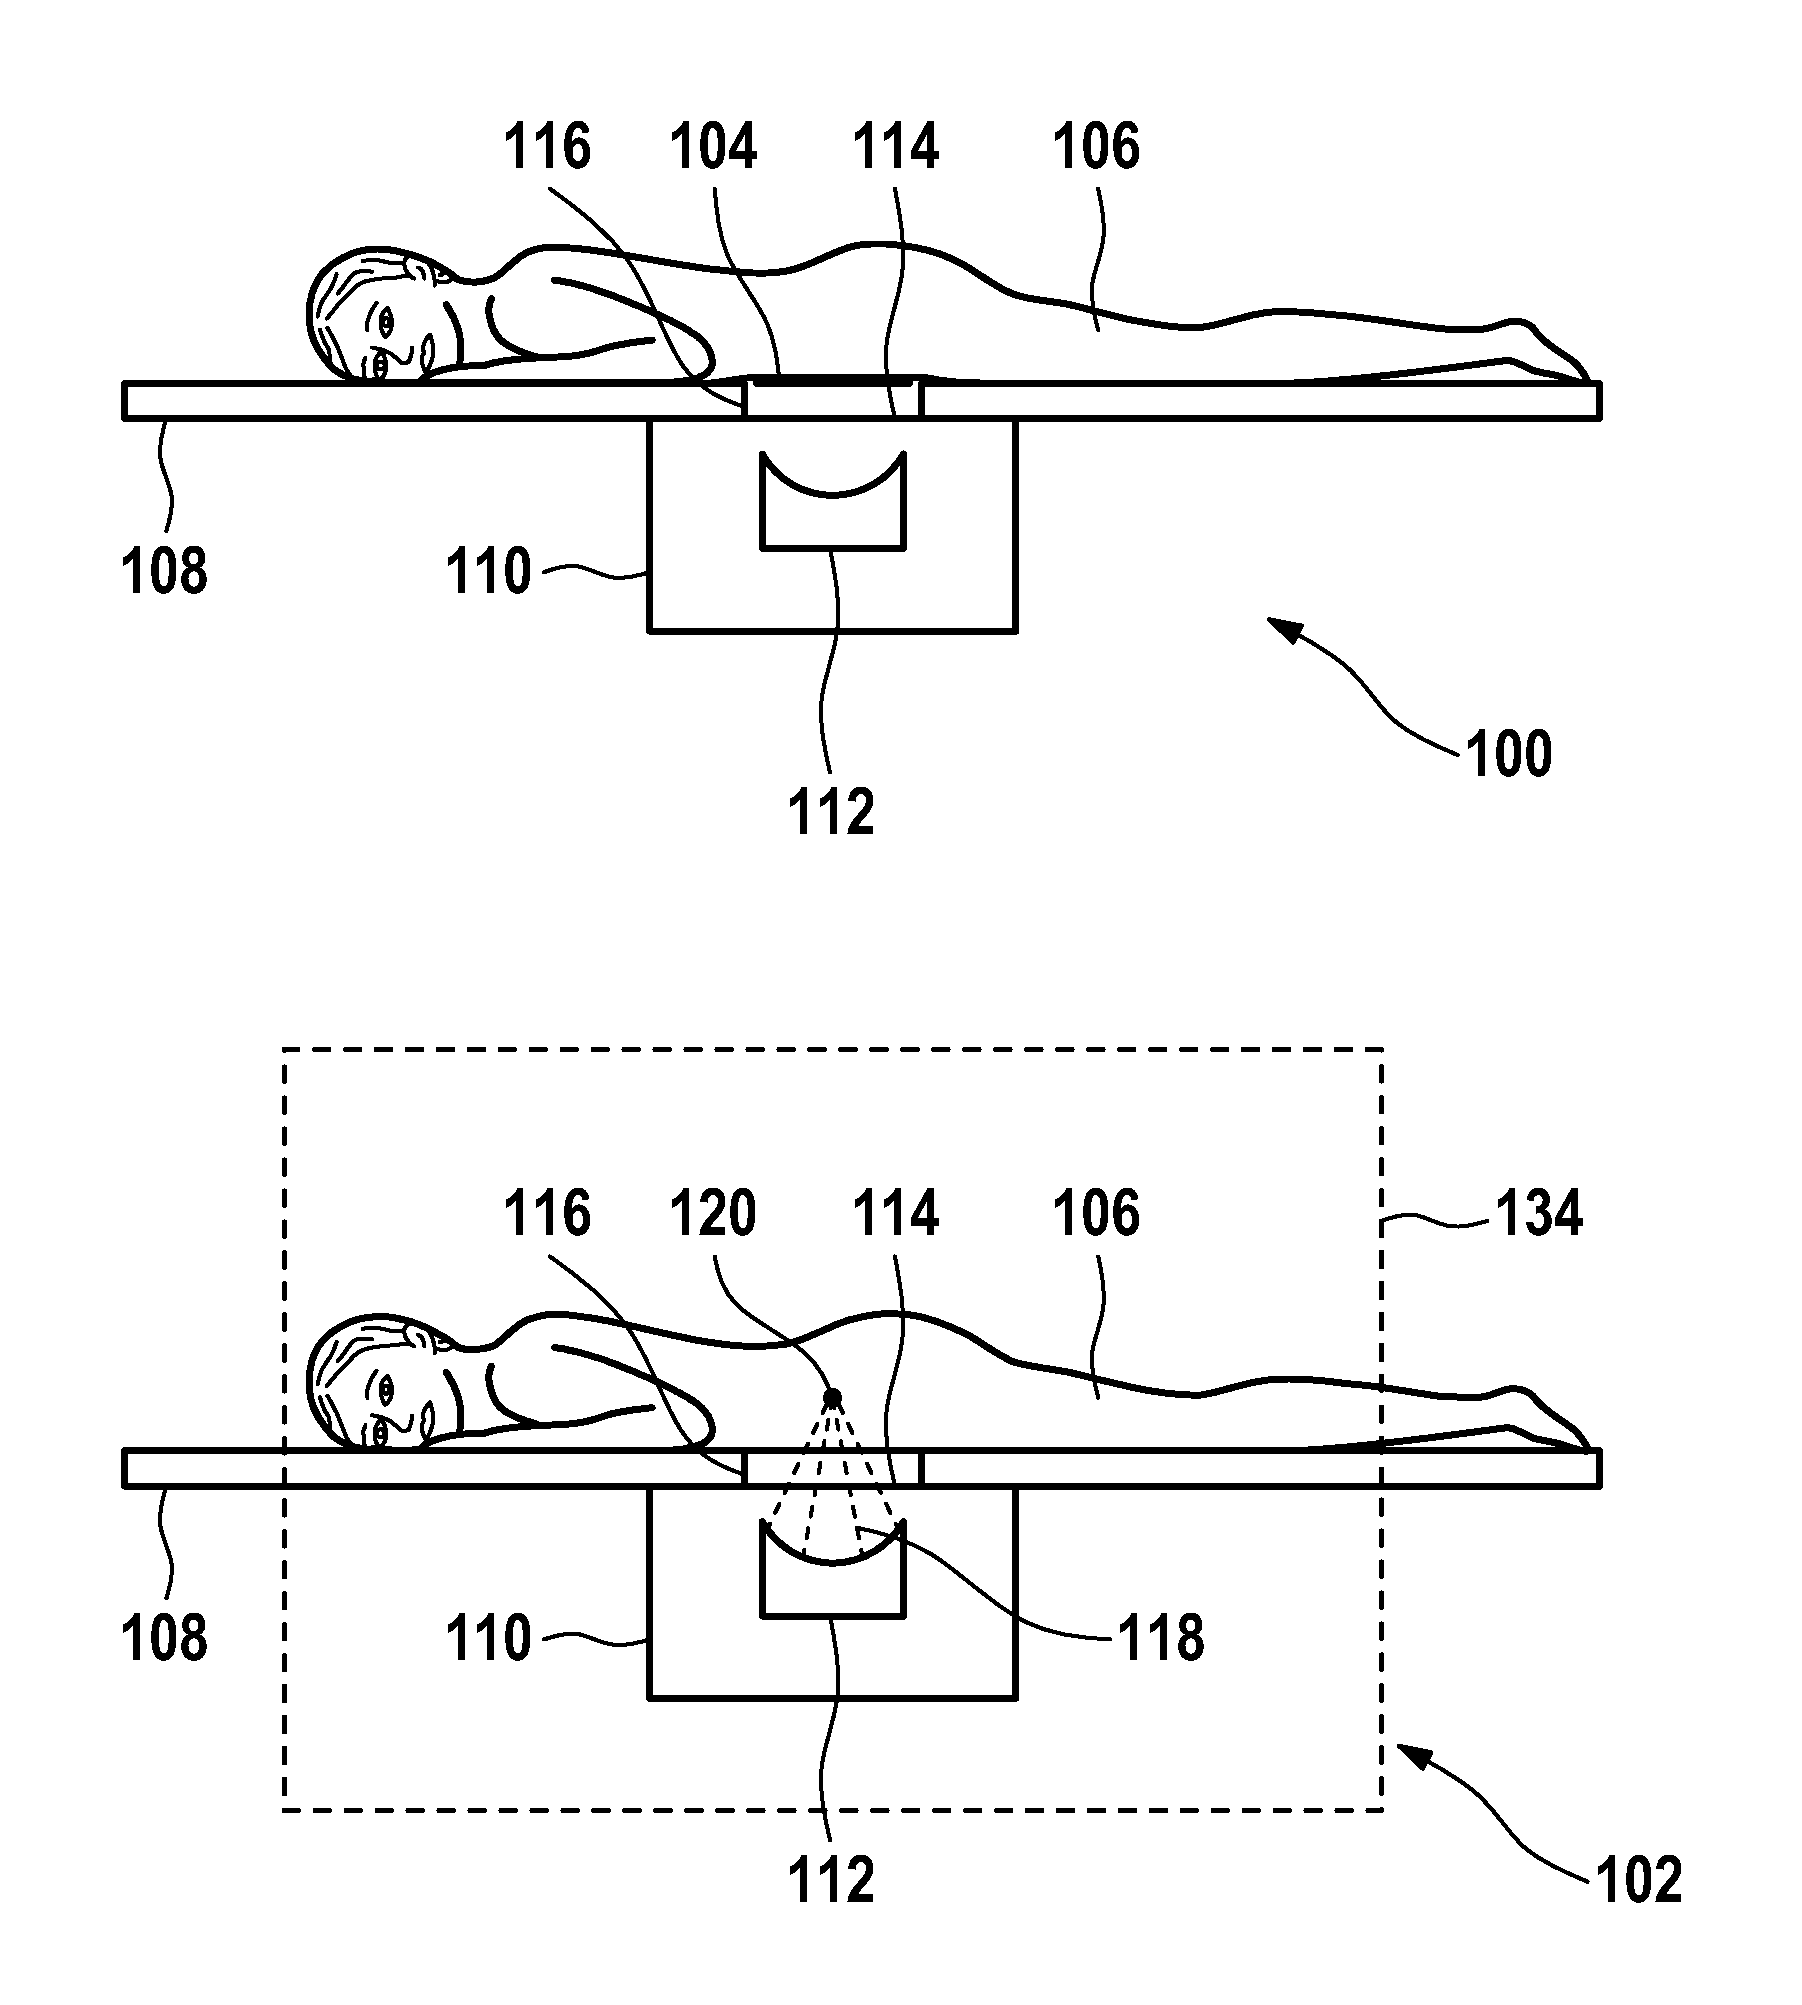 Ultrasonic treatment apparatus with a protective cover